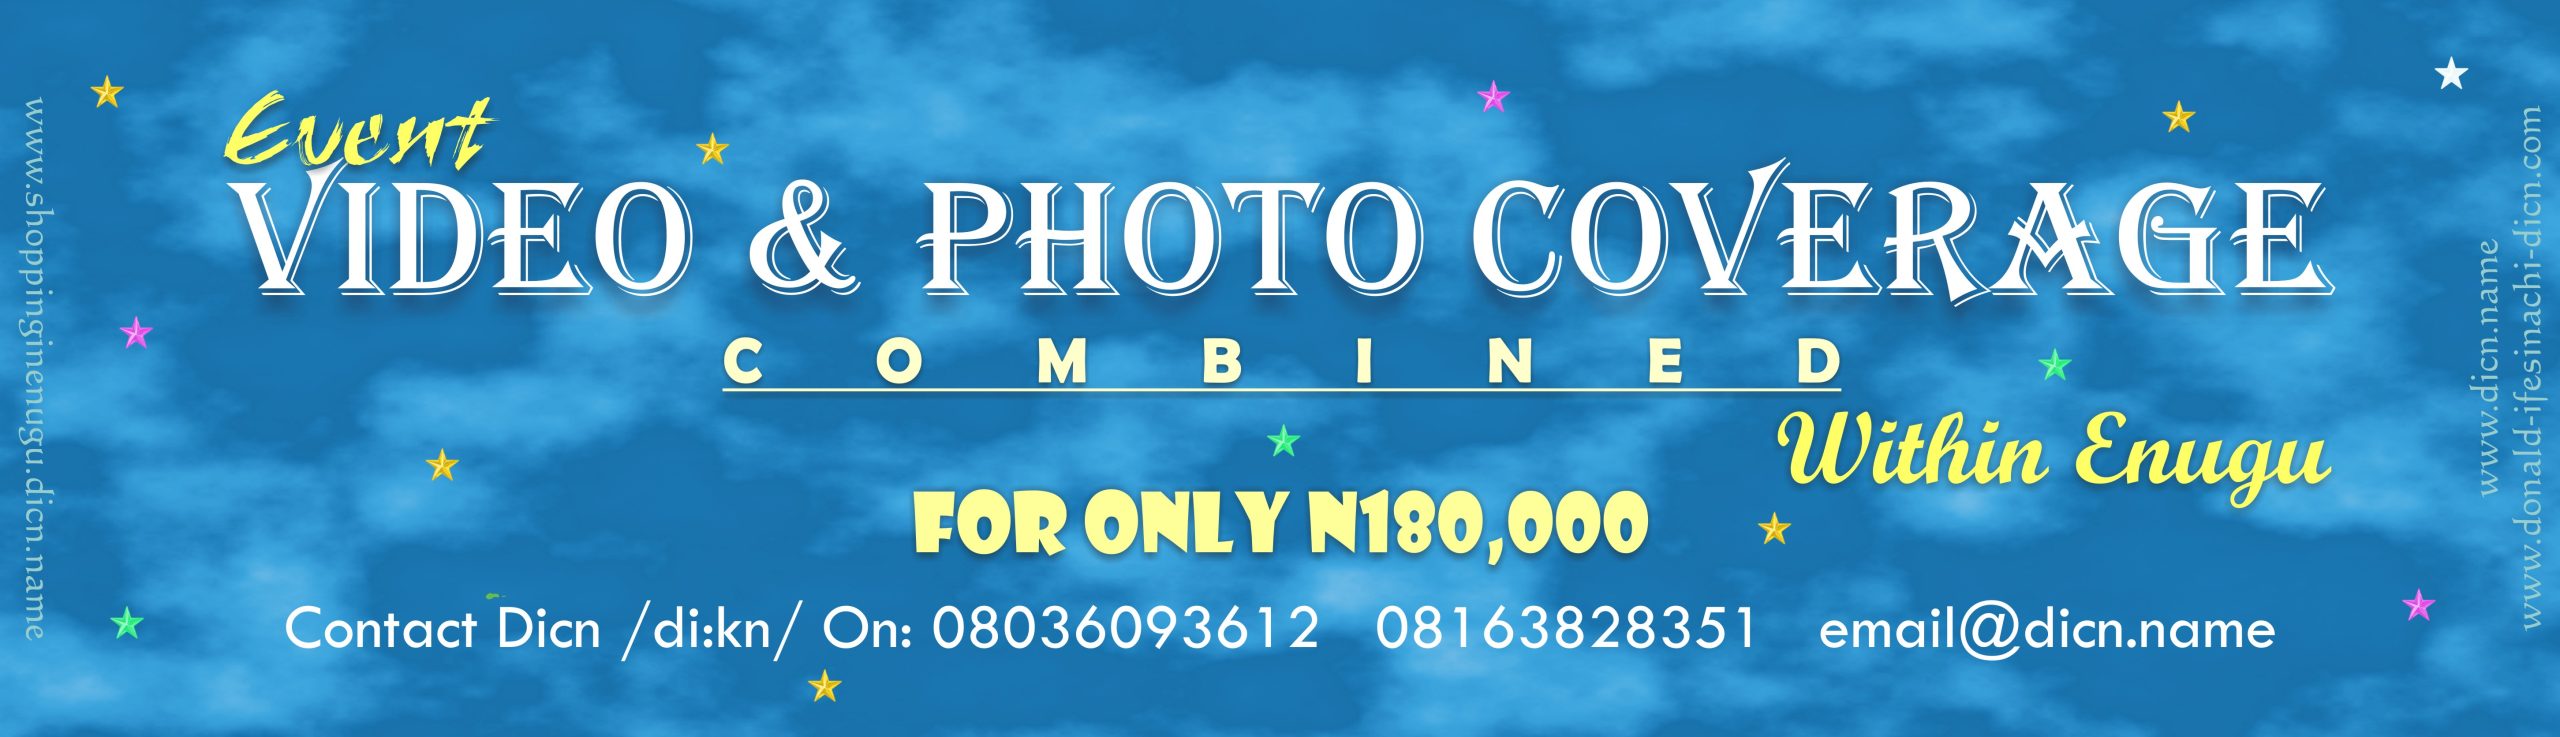 Affordable Video & Photo Coverage In Enugu By Donald IfesinaChi (Dicn)